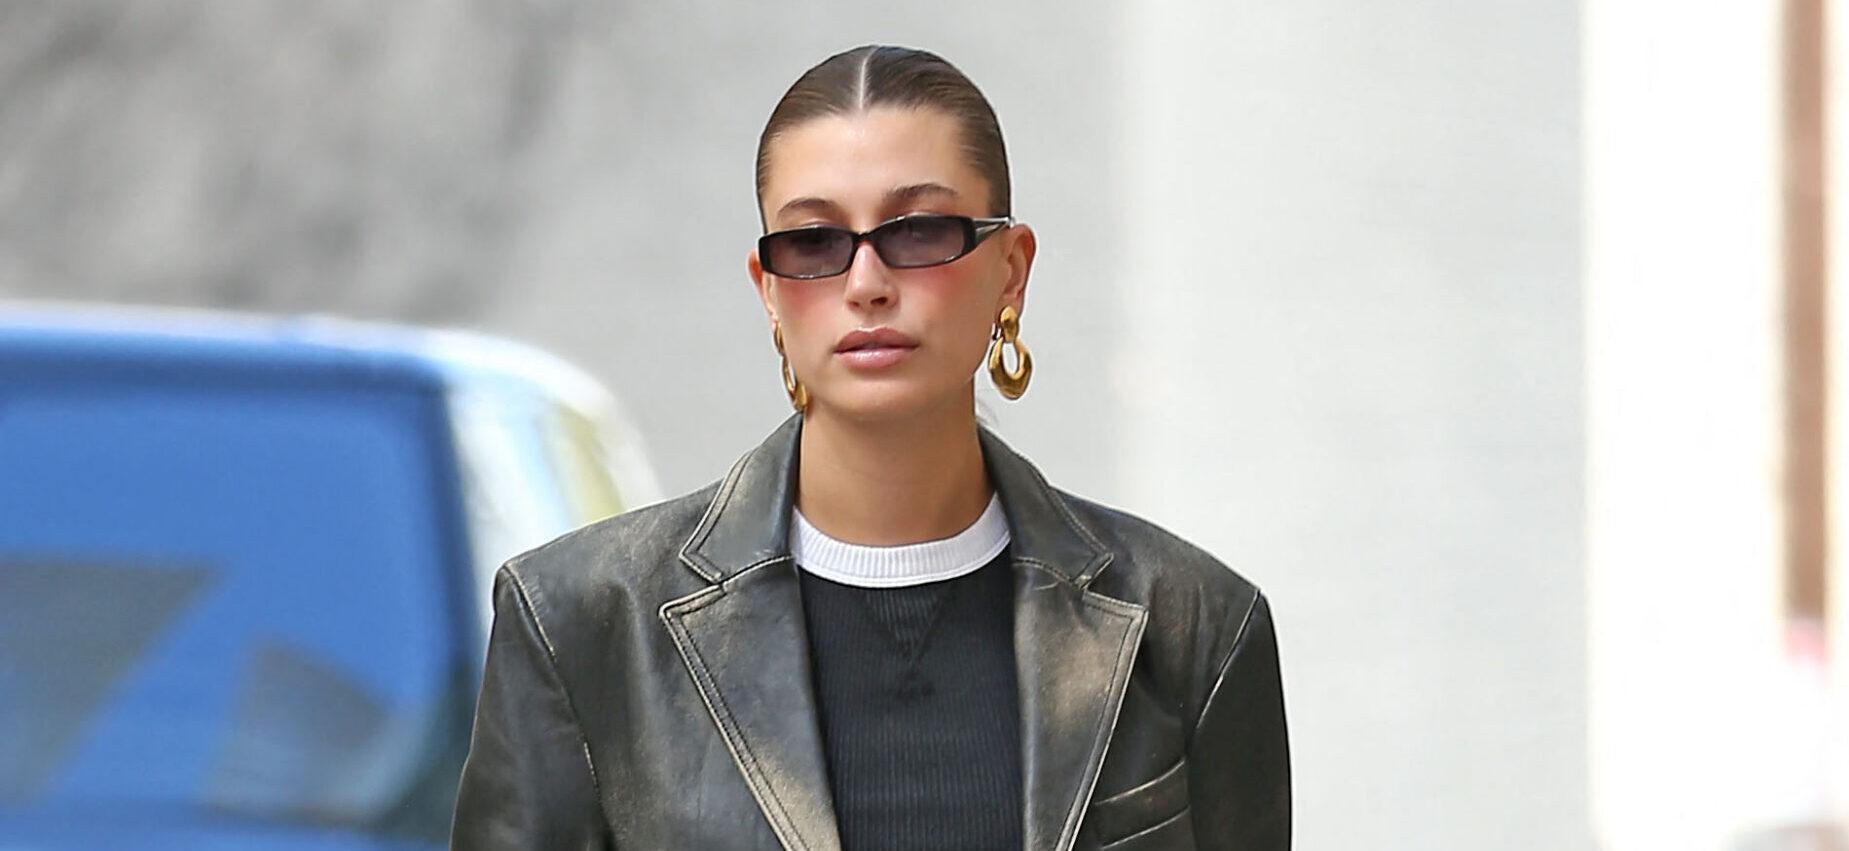 Hailey Bieber Serves Face Card & Abs In Daring All-Leather Look In New Pic